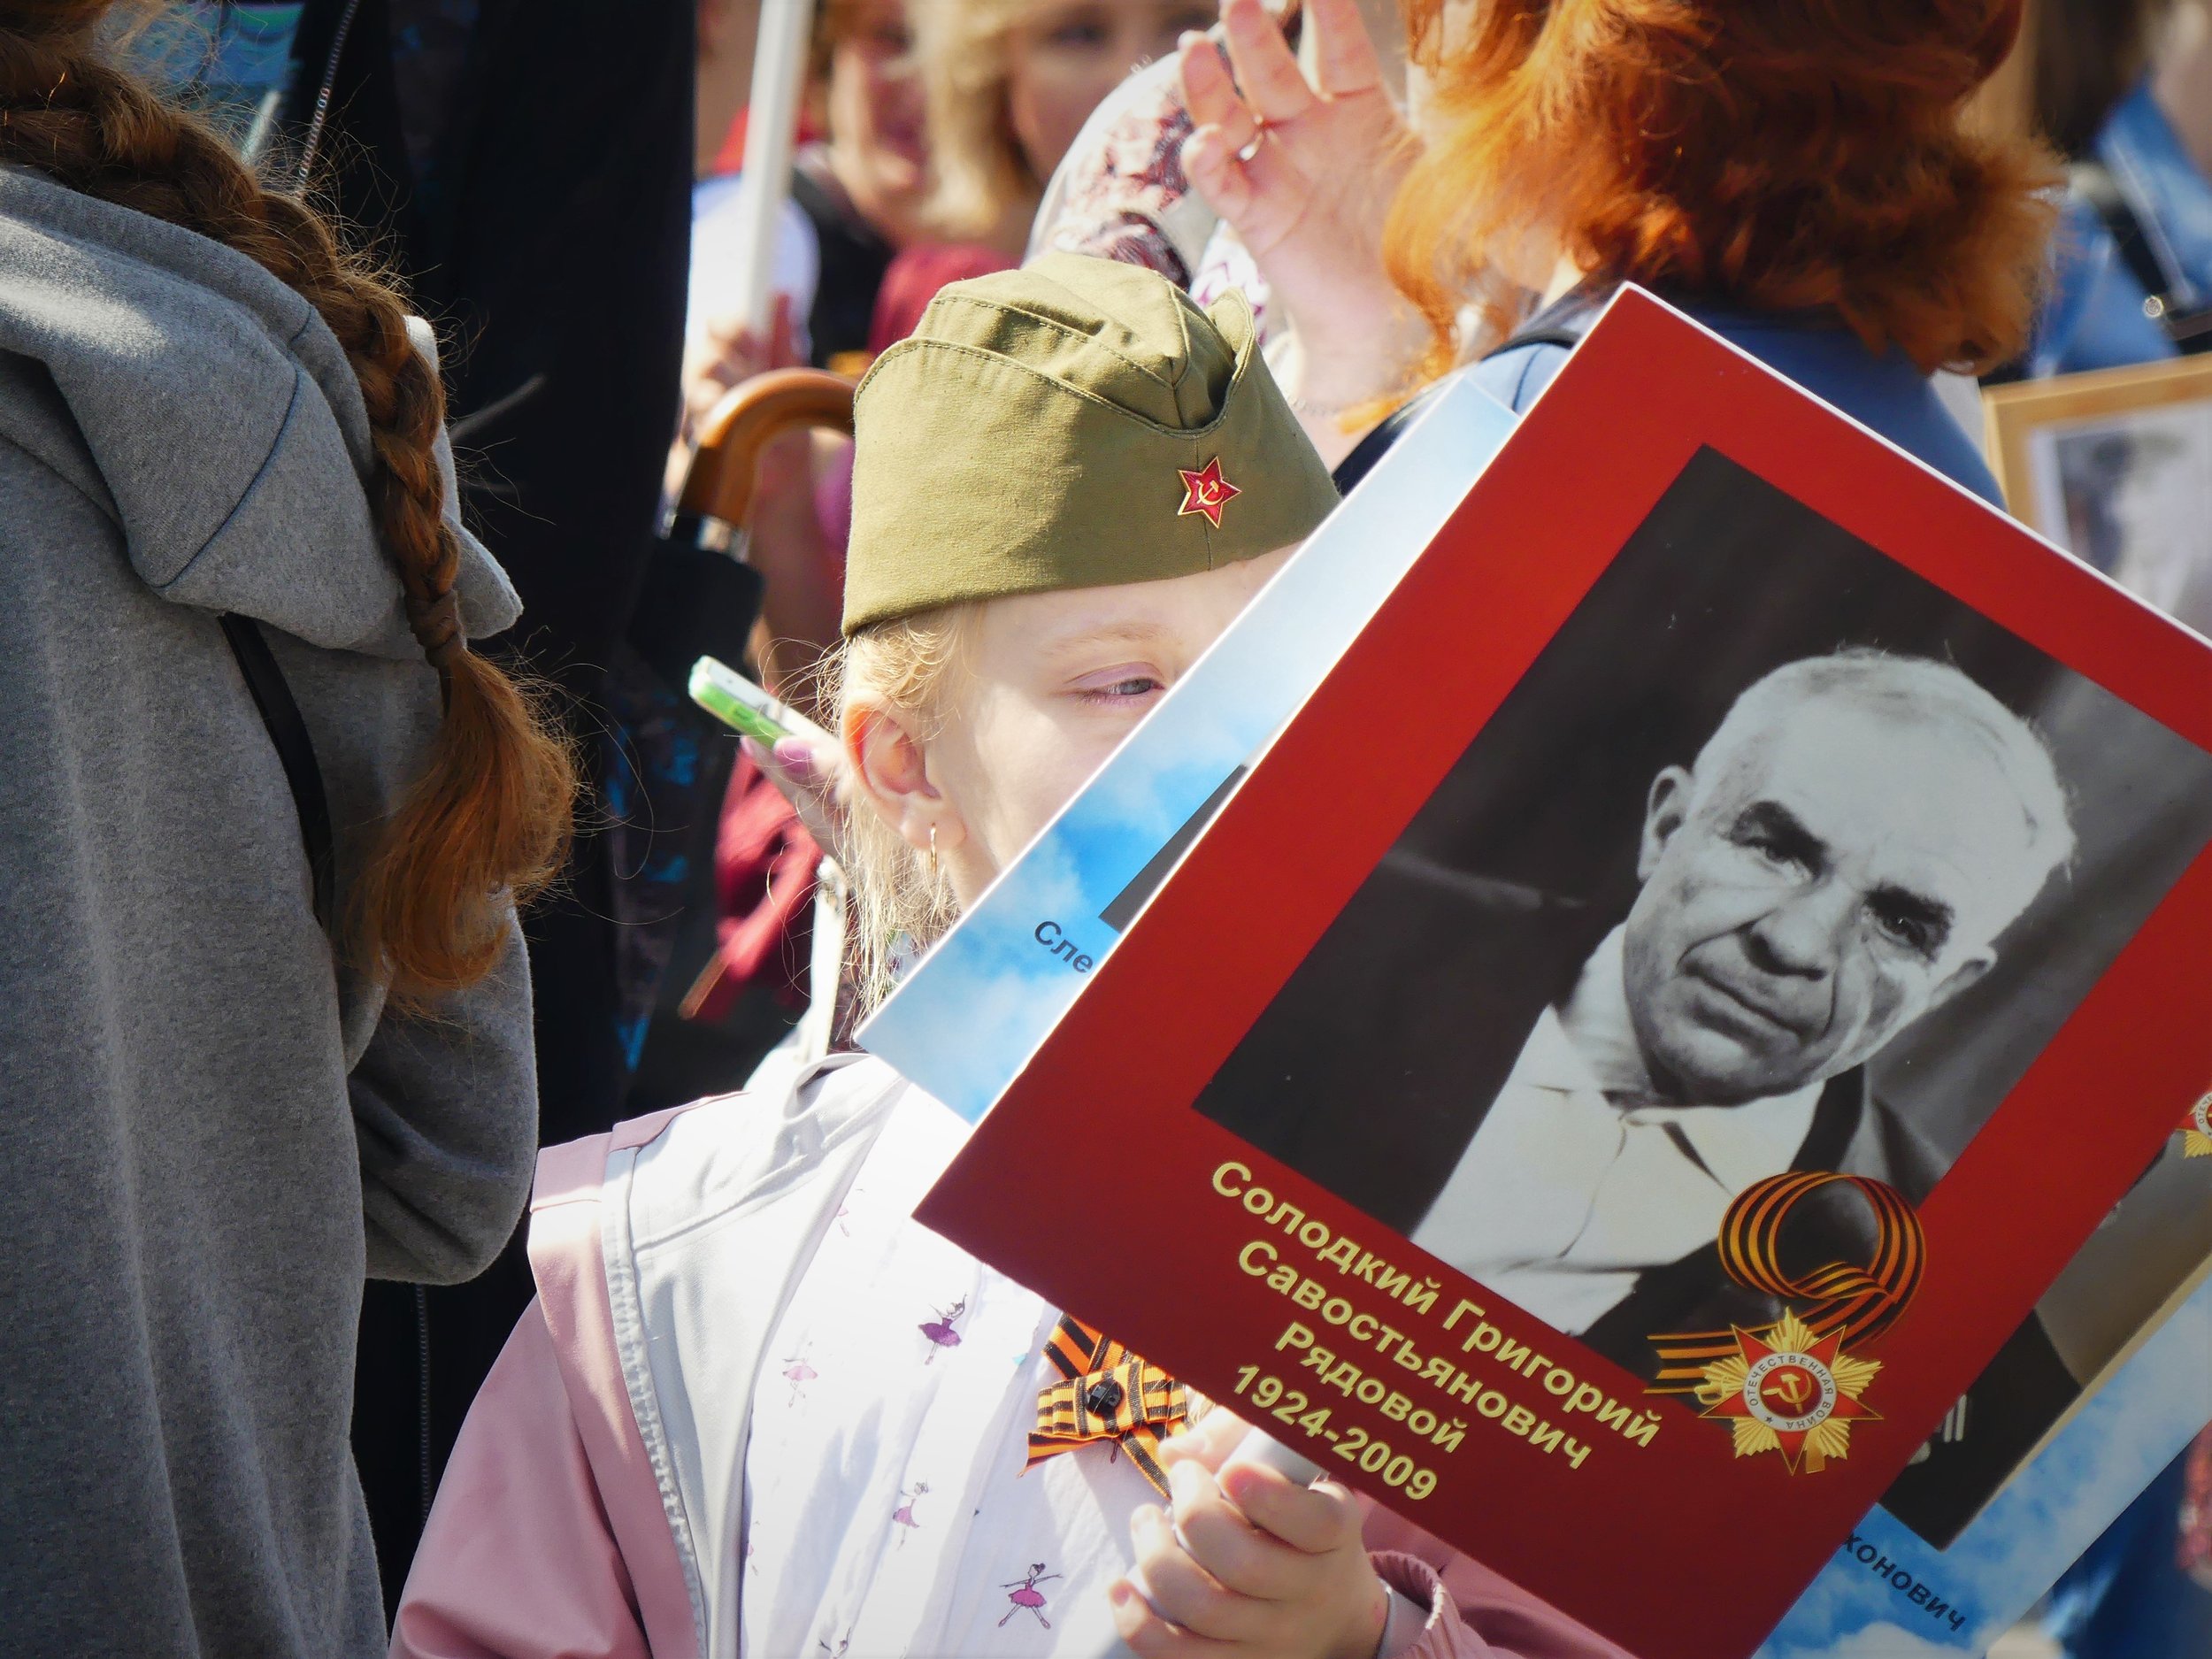  A little girl holds a portrait of a man, likely her ancestor, who fought in the Great Patriotic War (World War II). 